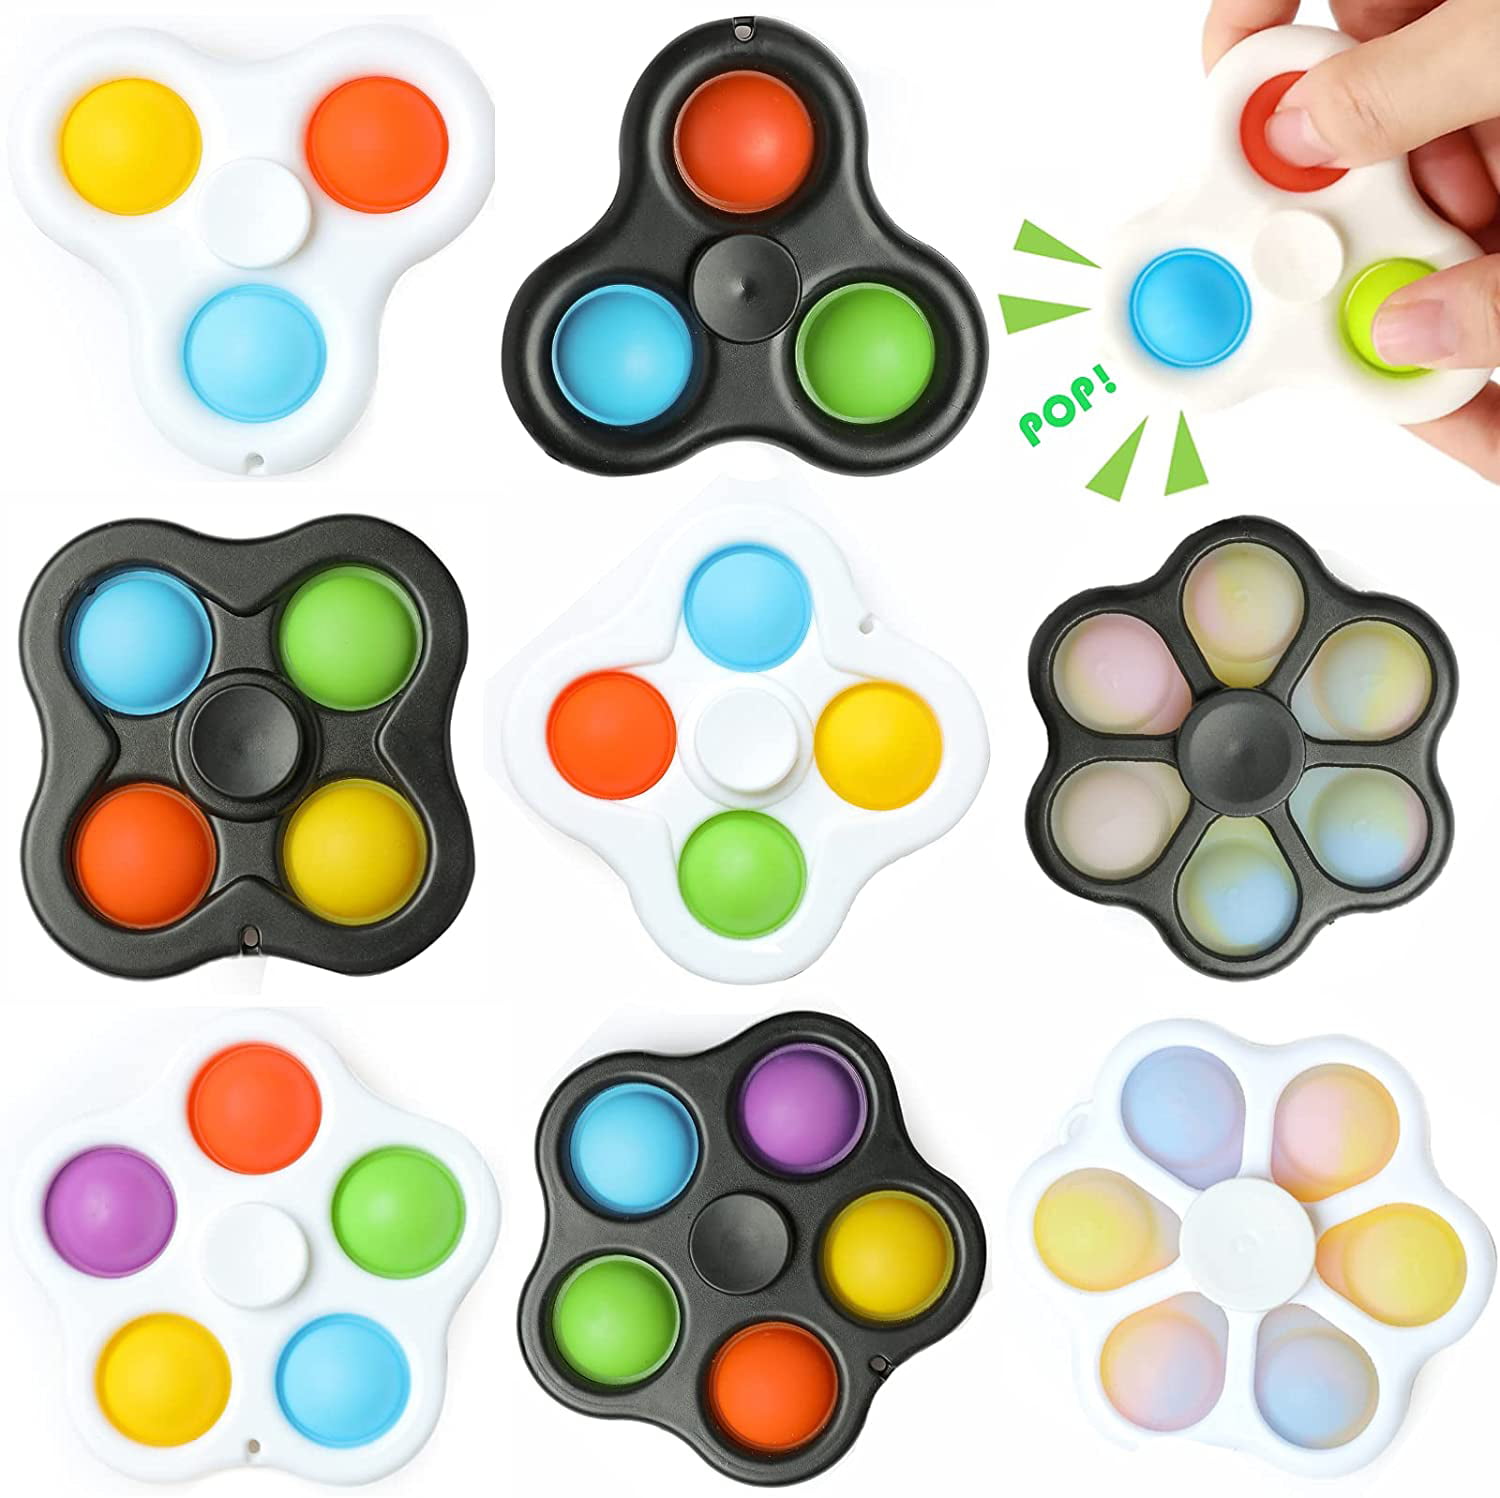 5Pack Set Fidget Sensory Toy Popet Spinner Simple Dimple Stress Relief Special 